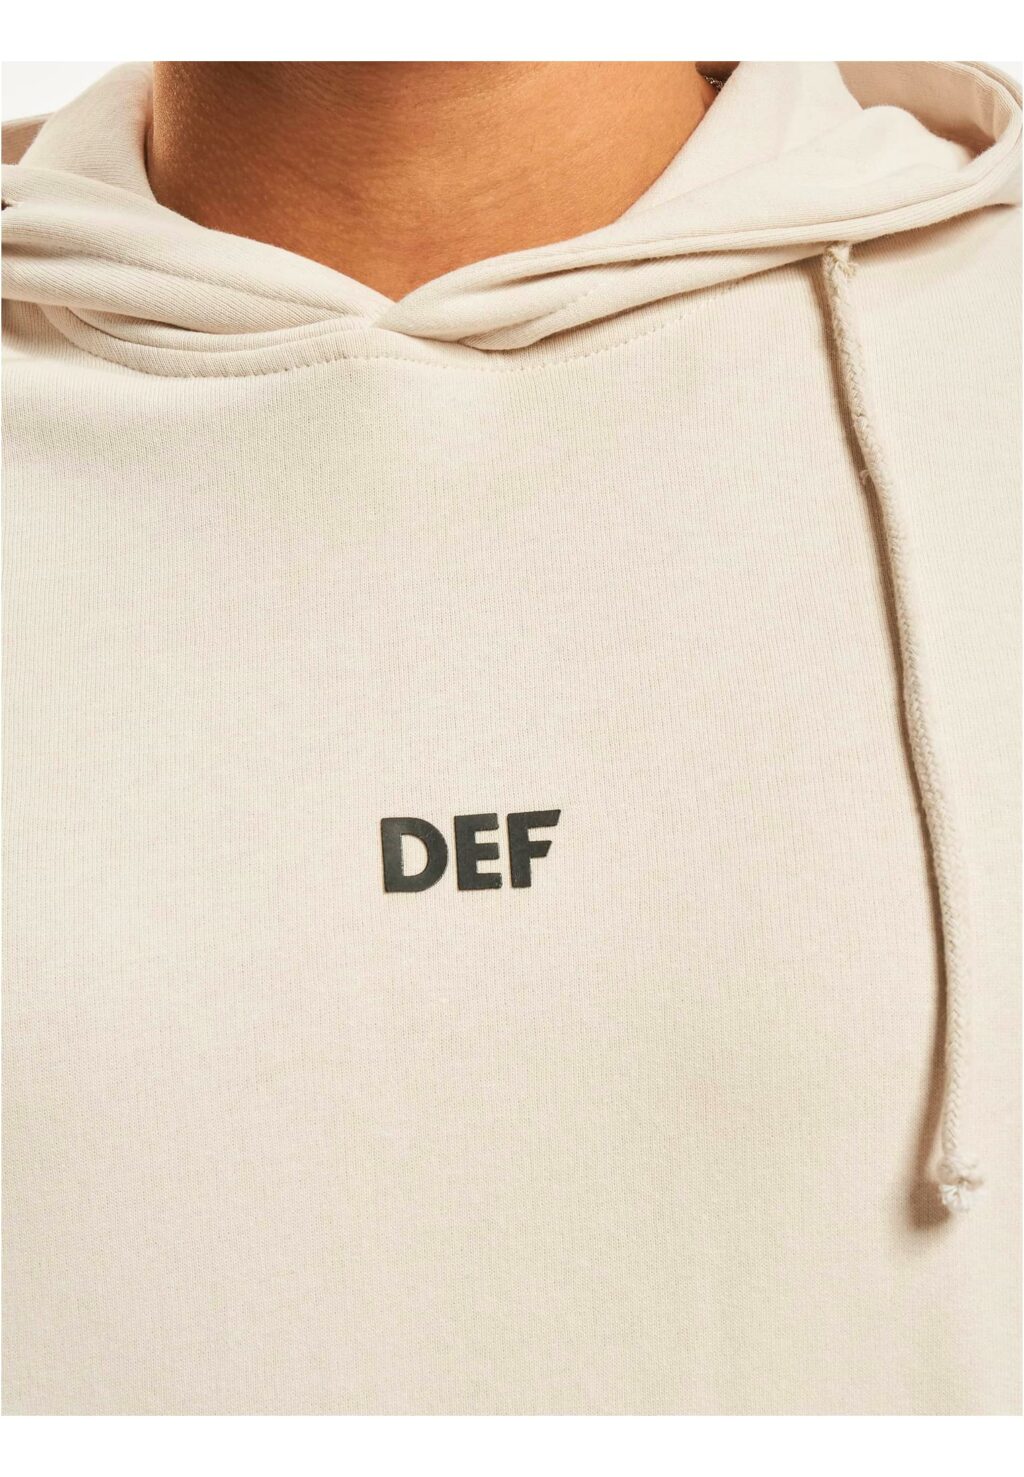 DEF Oversized Hoody Lilac lilac DFHD147LIL